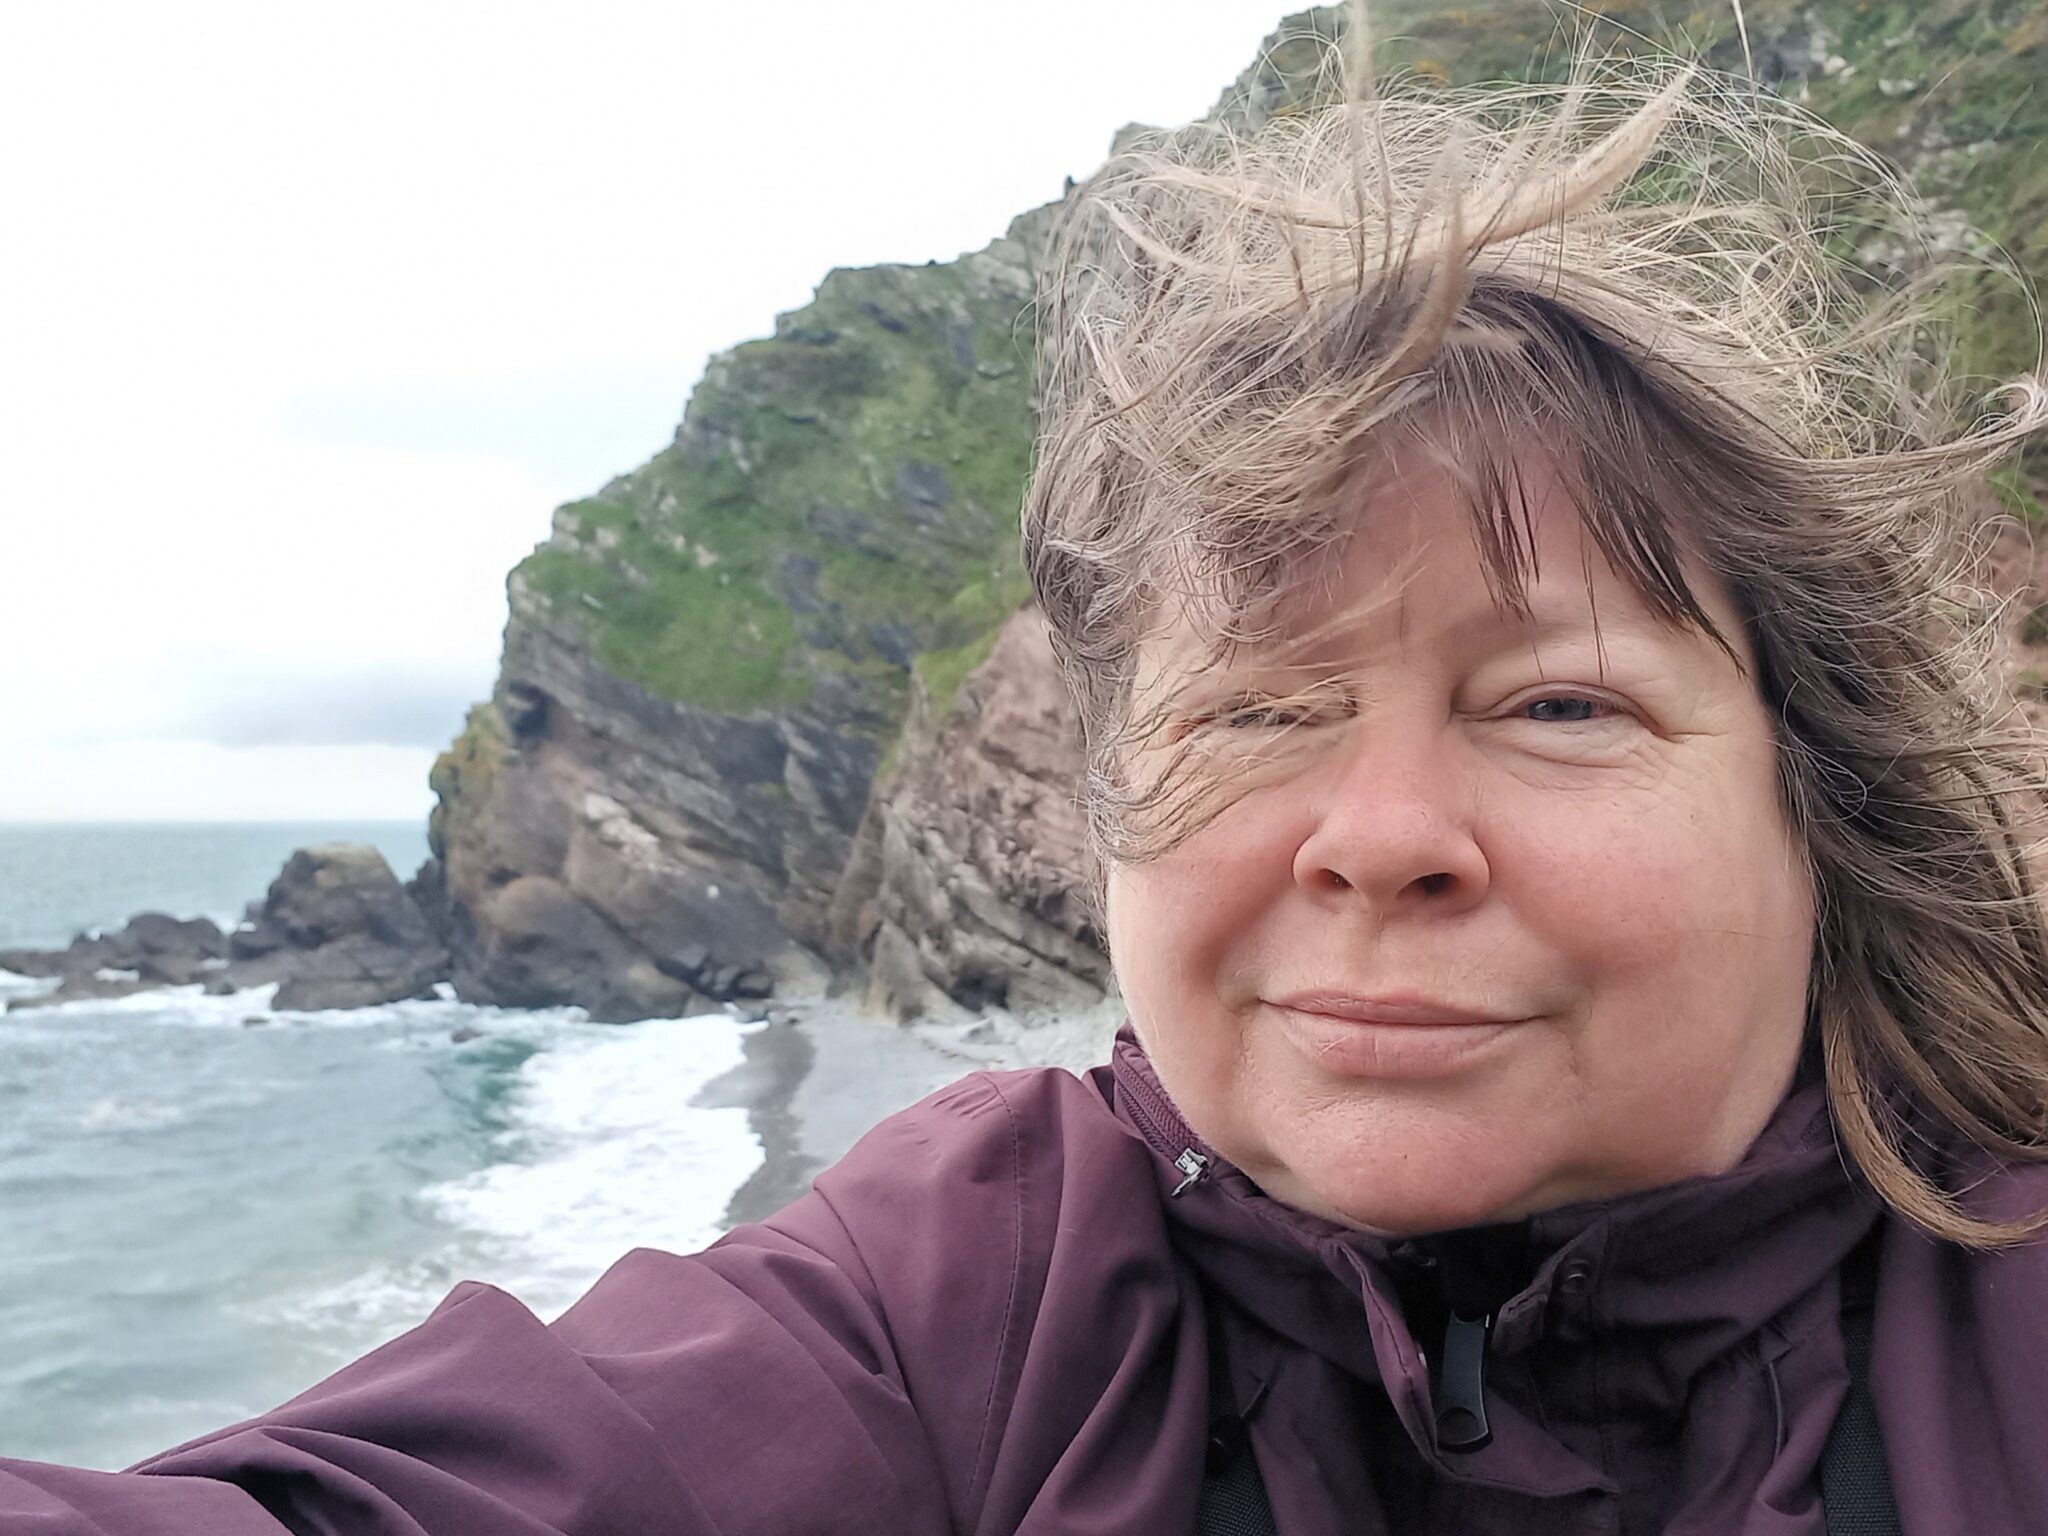 A white person taking a selfie with sea and coast behind them. It is very windy, so their hair is flying around and obscuring part of their face.